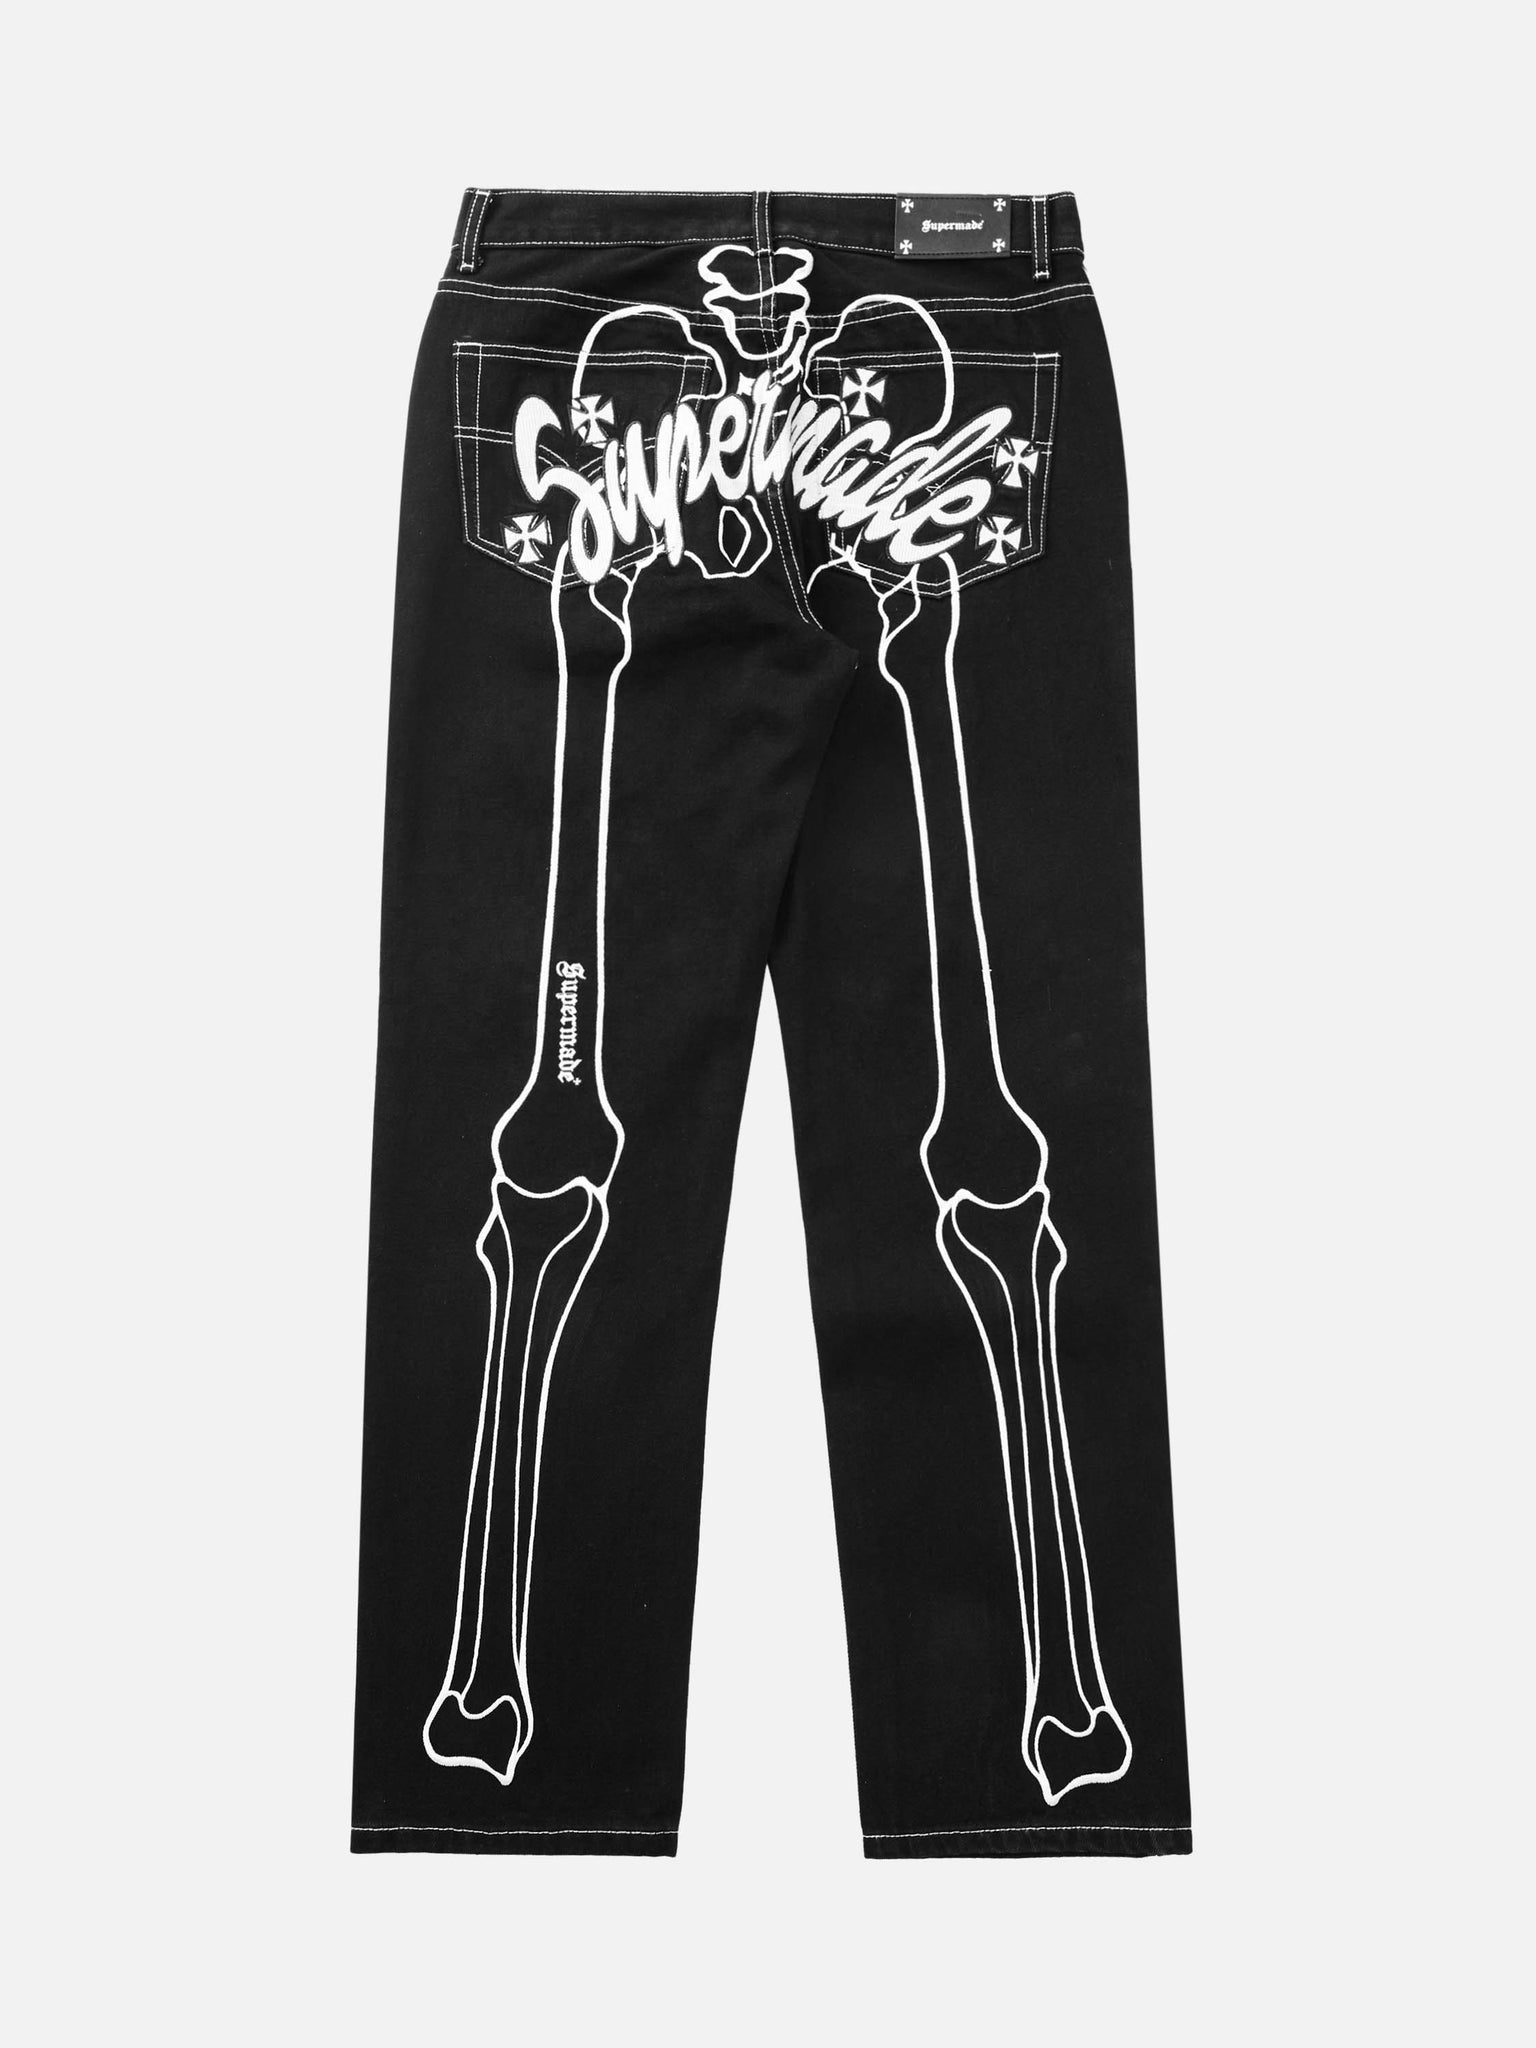 Thesupermade Hip Hop Bones Embroidered Jeans - 1859